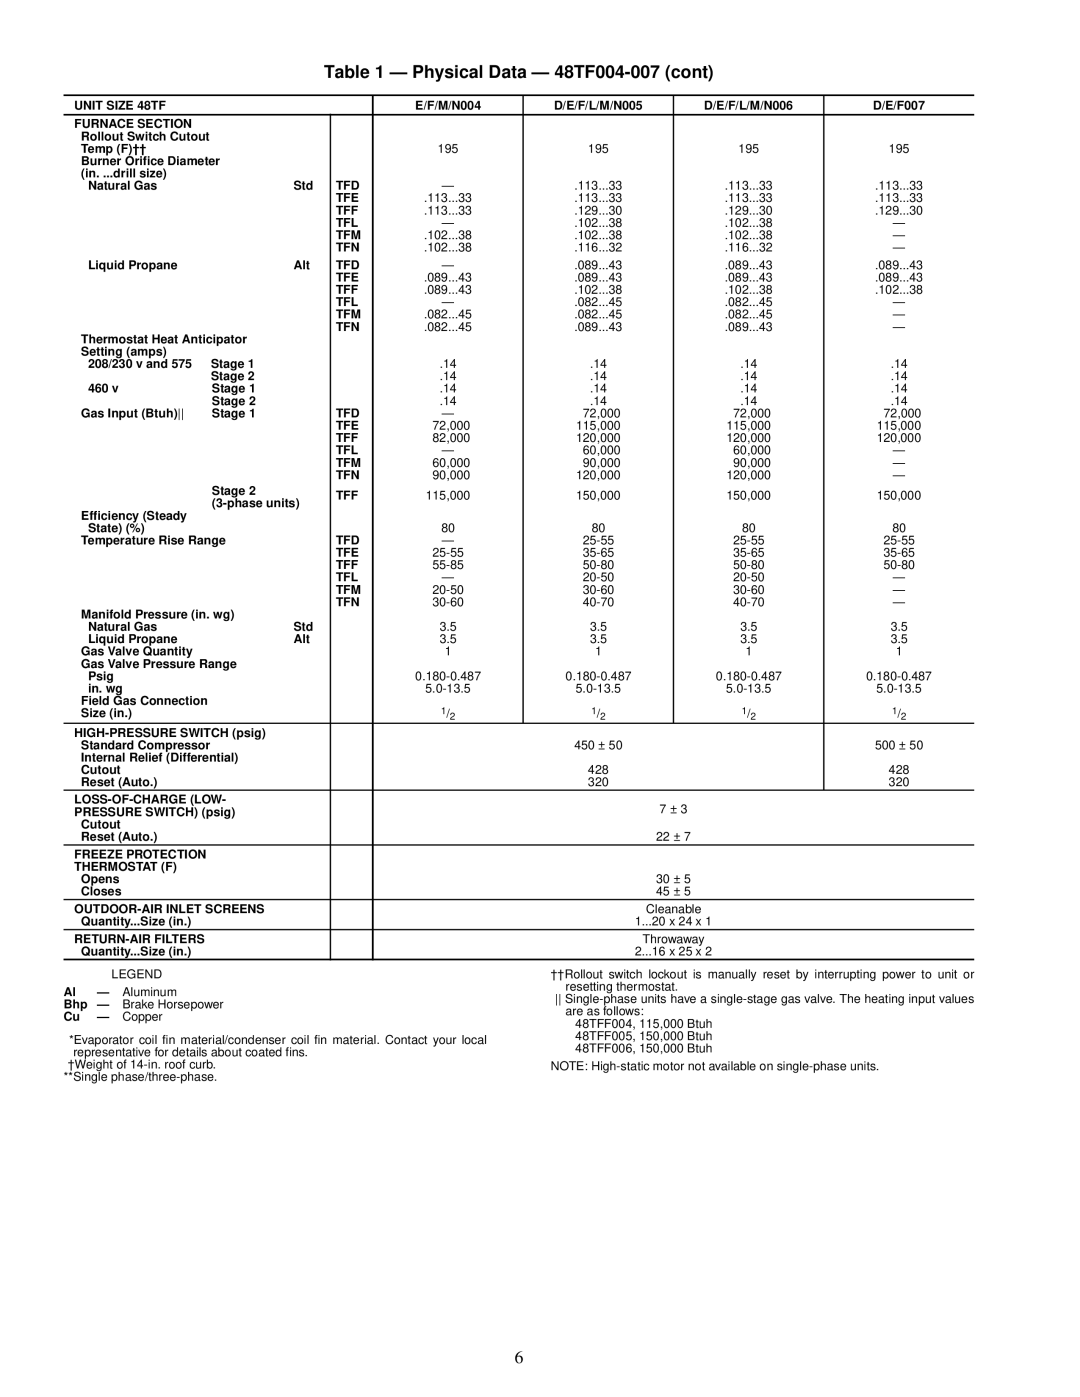 Carrier specifications Physical Data - 48TF004-007cont 